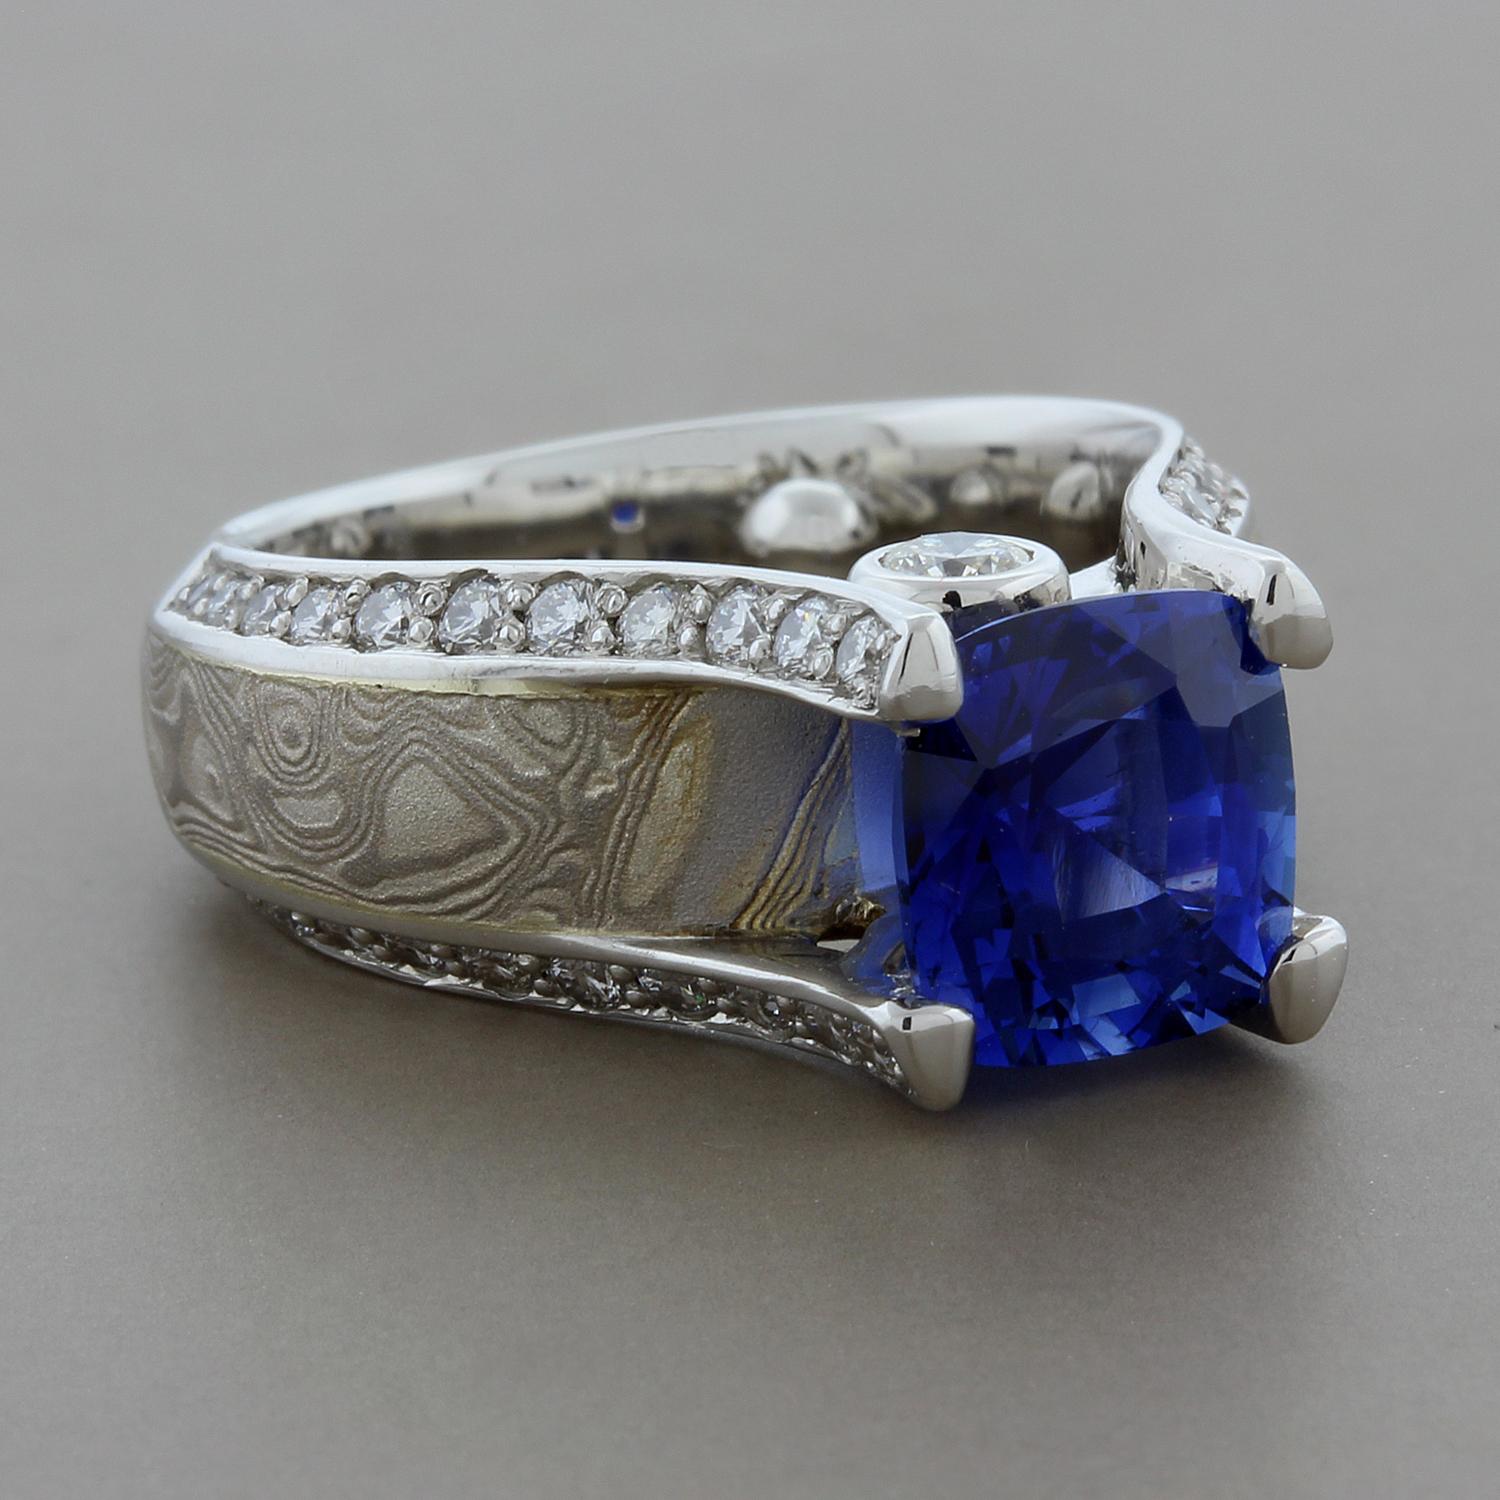 Kirkawa presents a ring featuring a 2.60 carat cushion cut vivid blue sapphire with 0.70 carats of white diamond accents. This striking ring is set in platinum and 14K white gold with a silver band in the center of the shank. The silver band